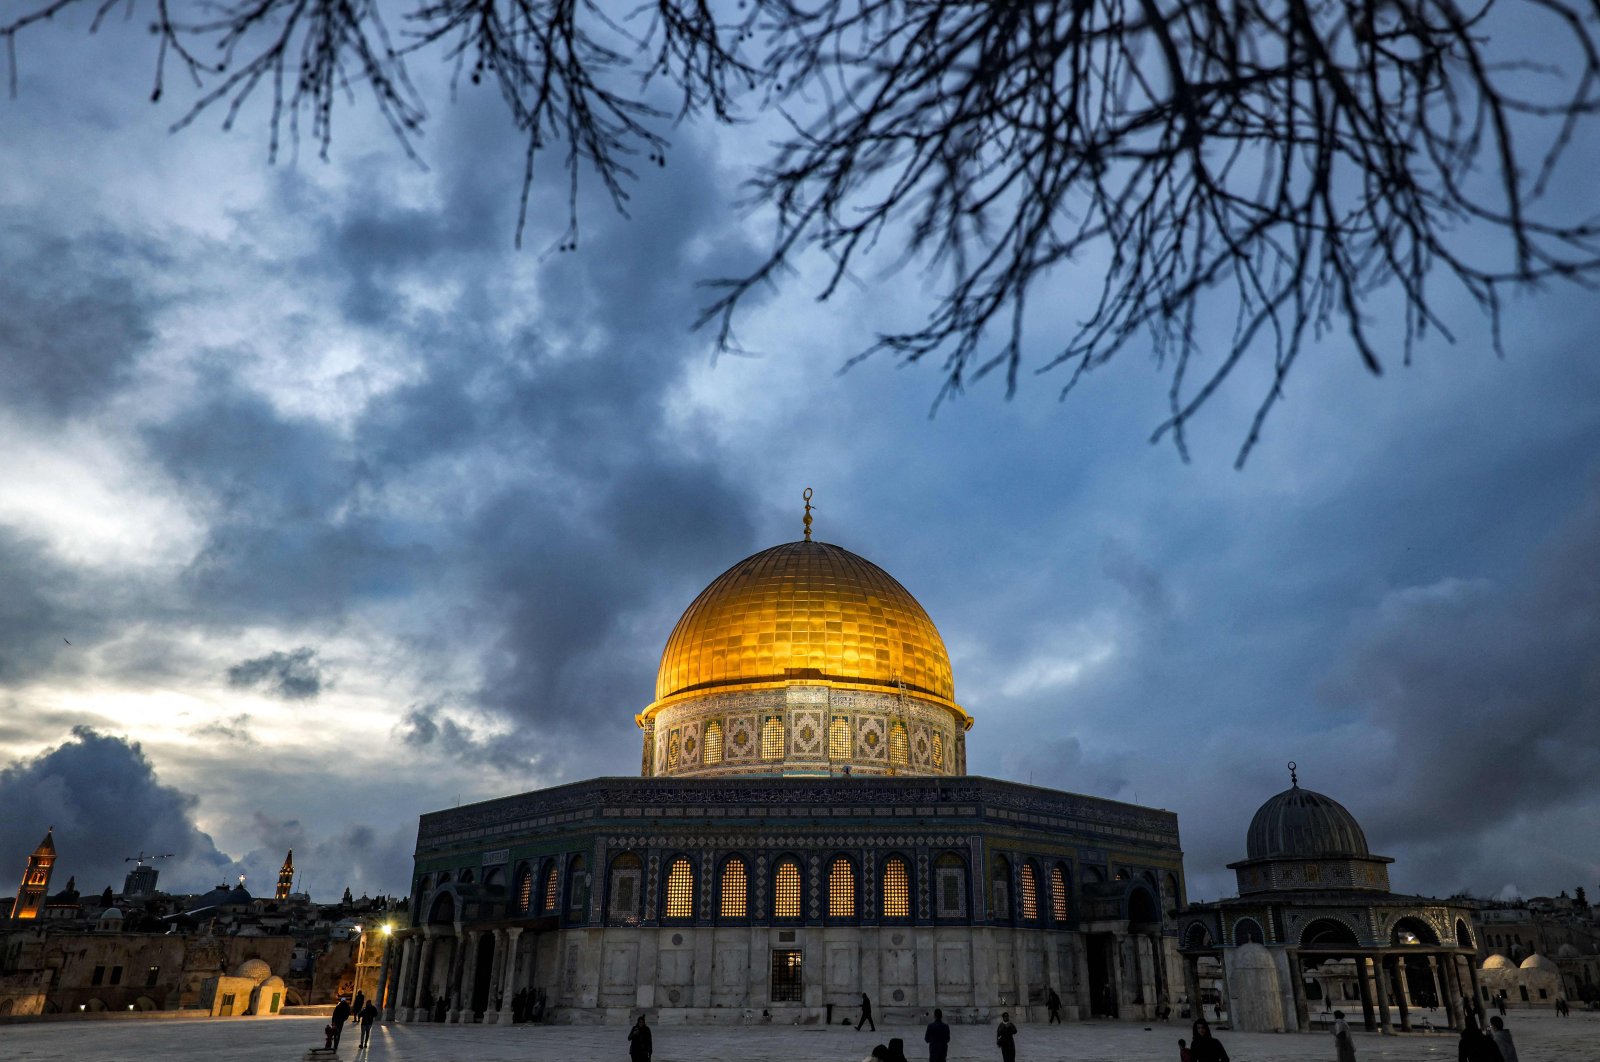 The Dome of the Rock shrine is lit up at dusk at the Al-Aqsa mosque compound, East Jerusalem, occupied Palestine, March 21, 2023. (AFP Photo)